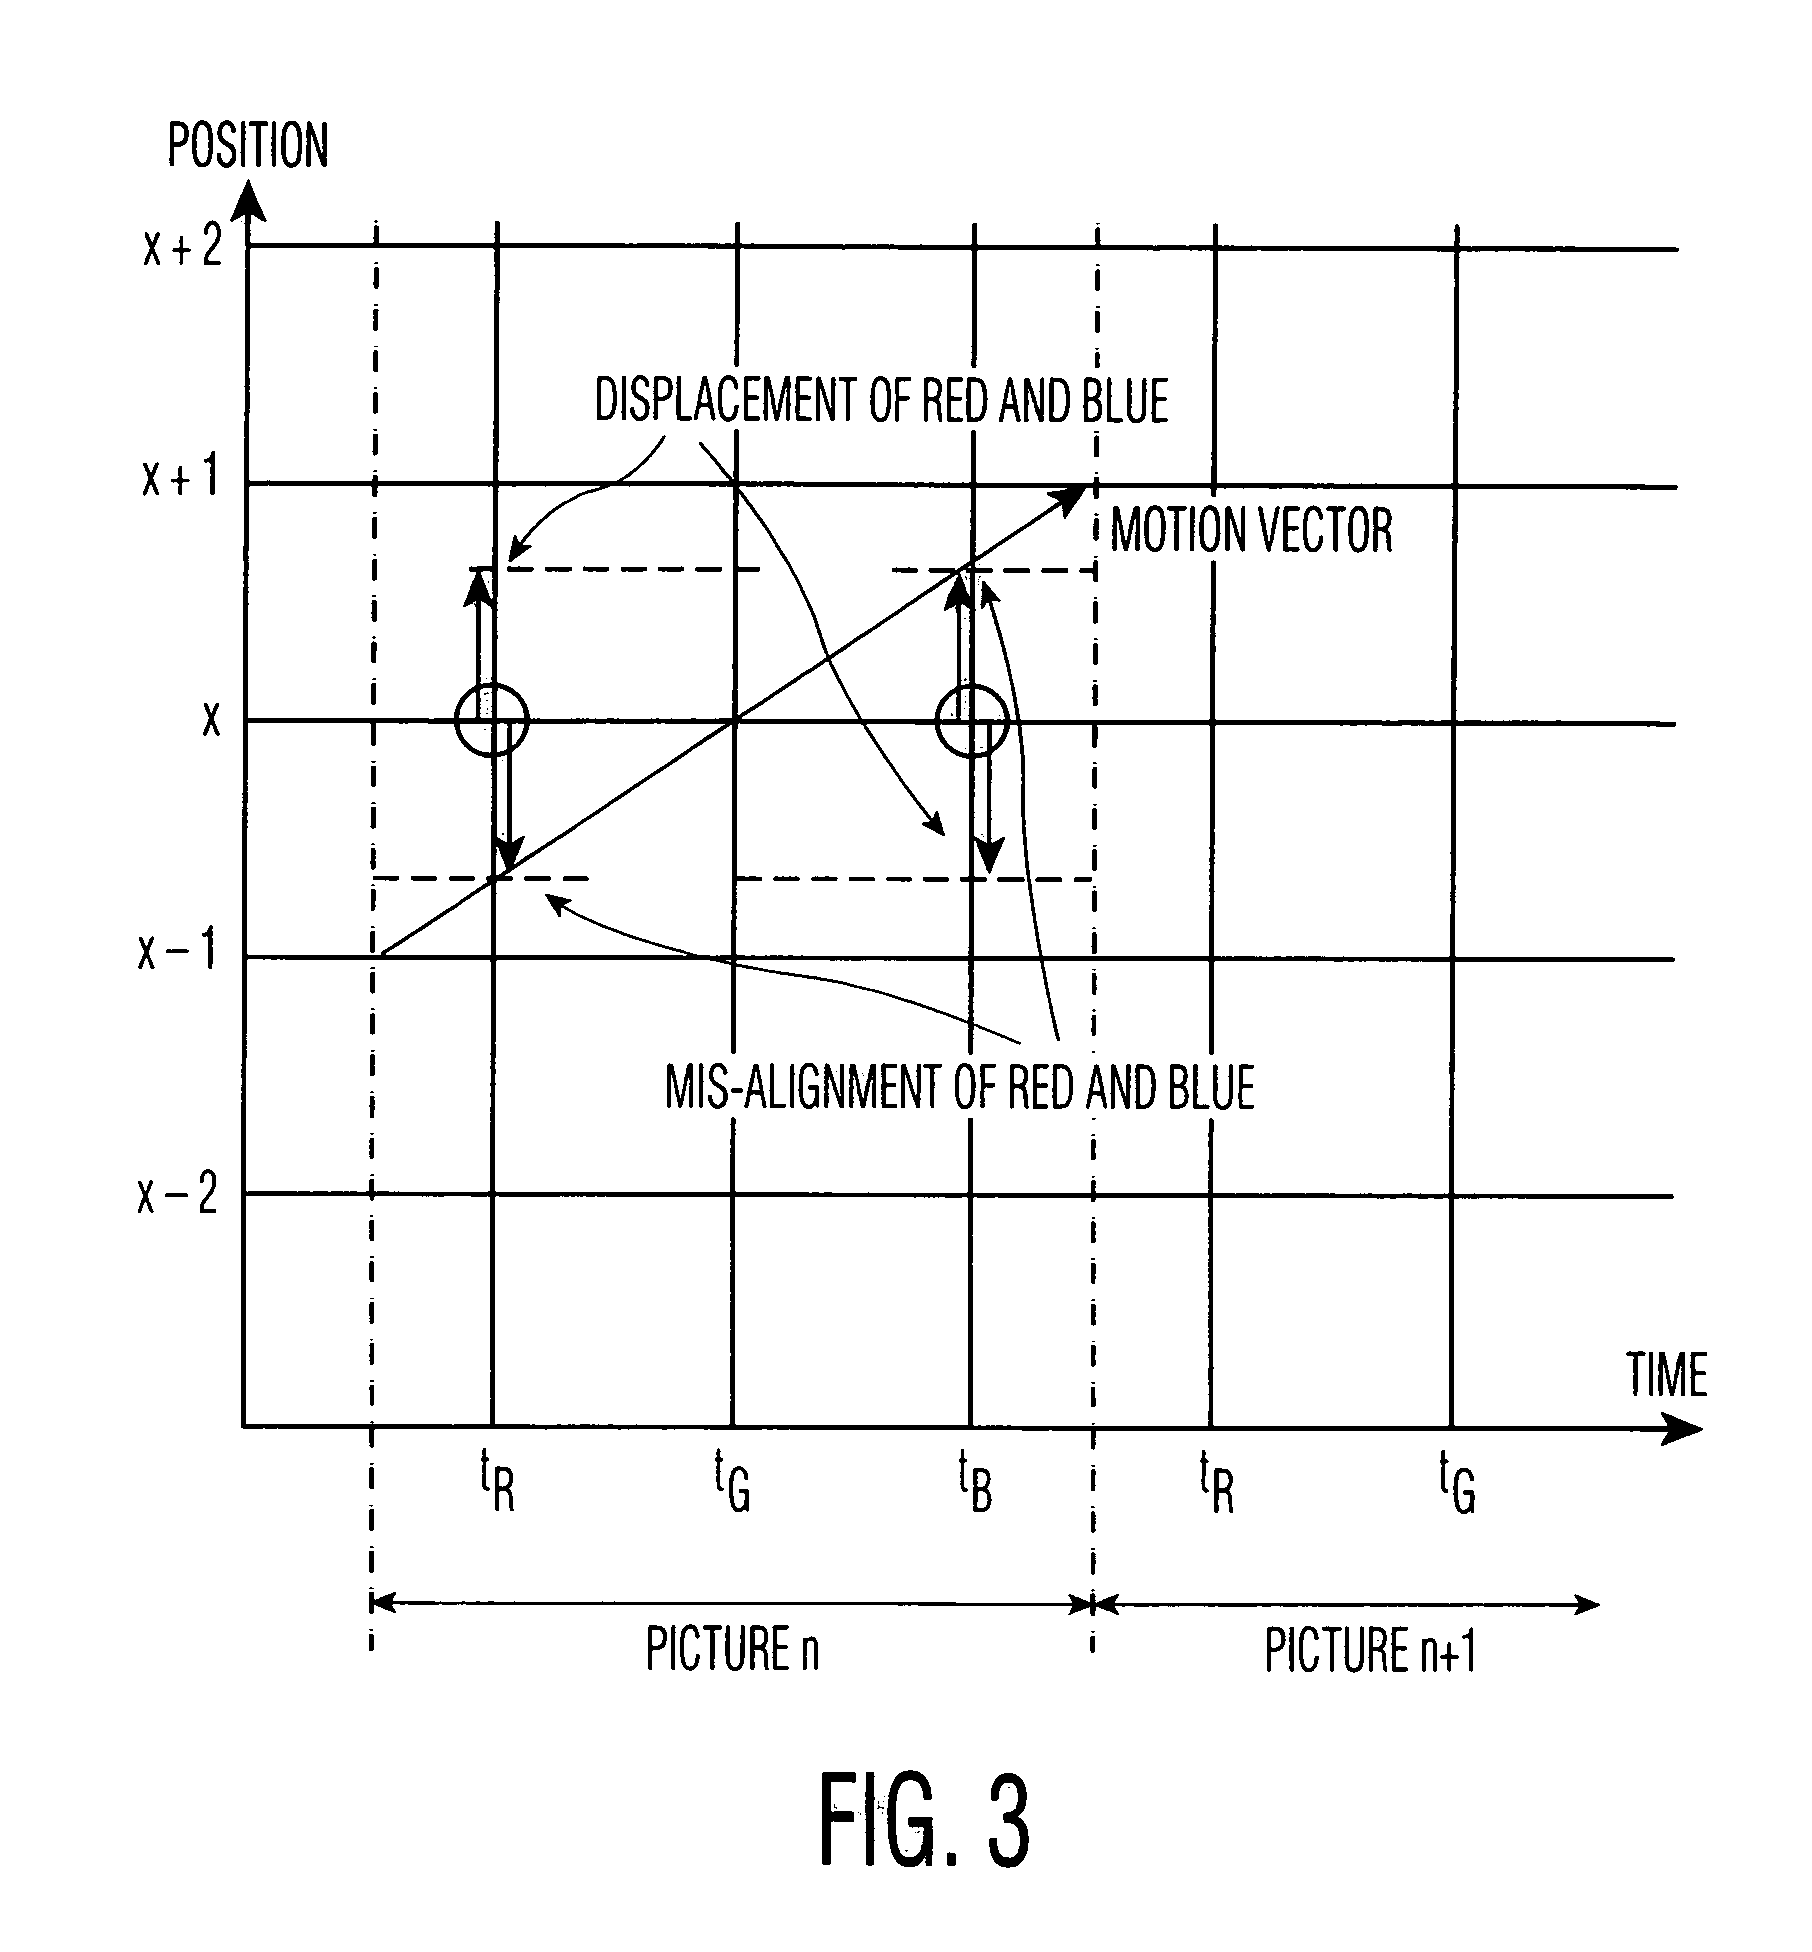 System and method for motion compensation of image planes in color sequential displays